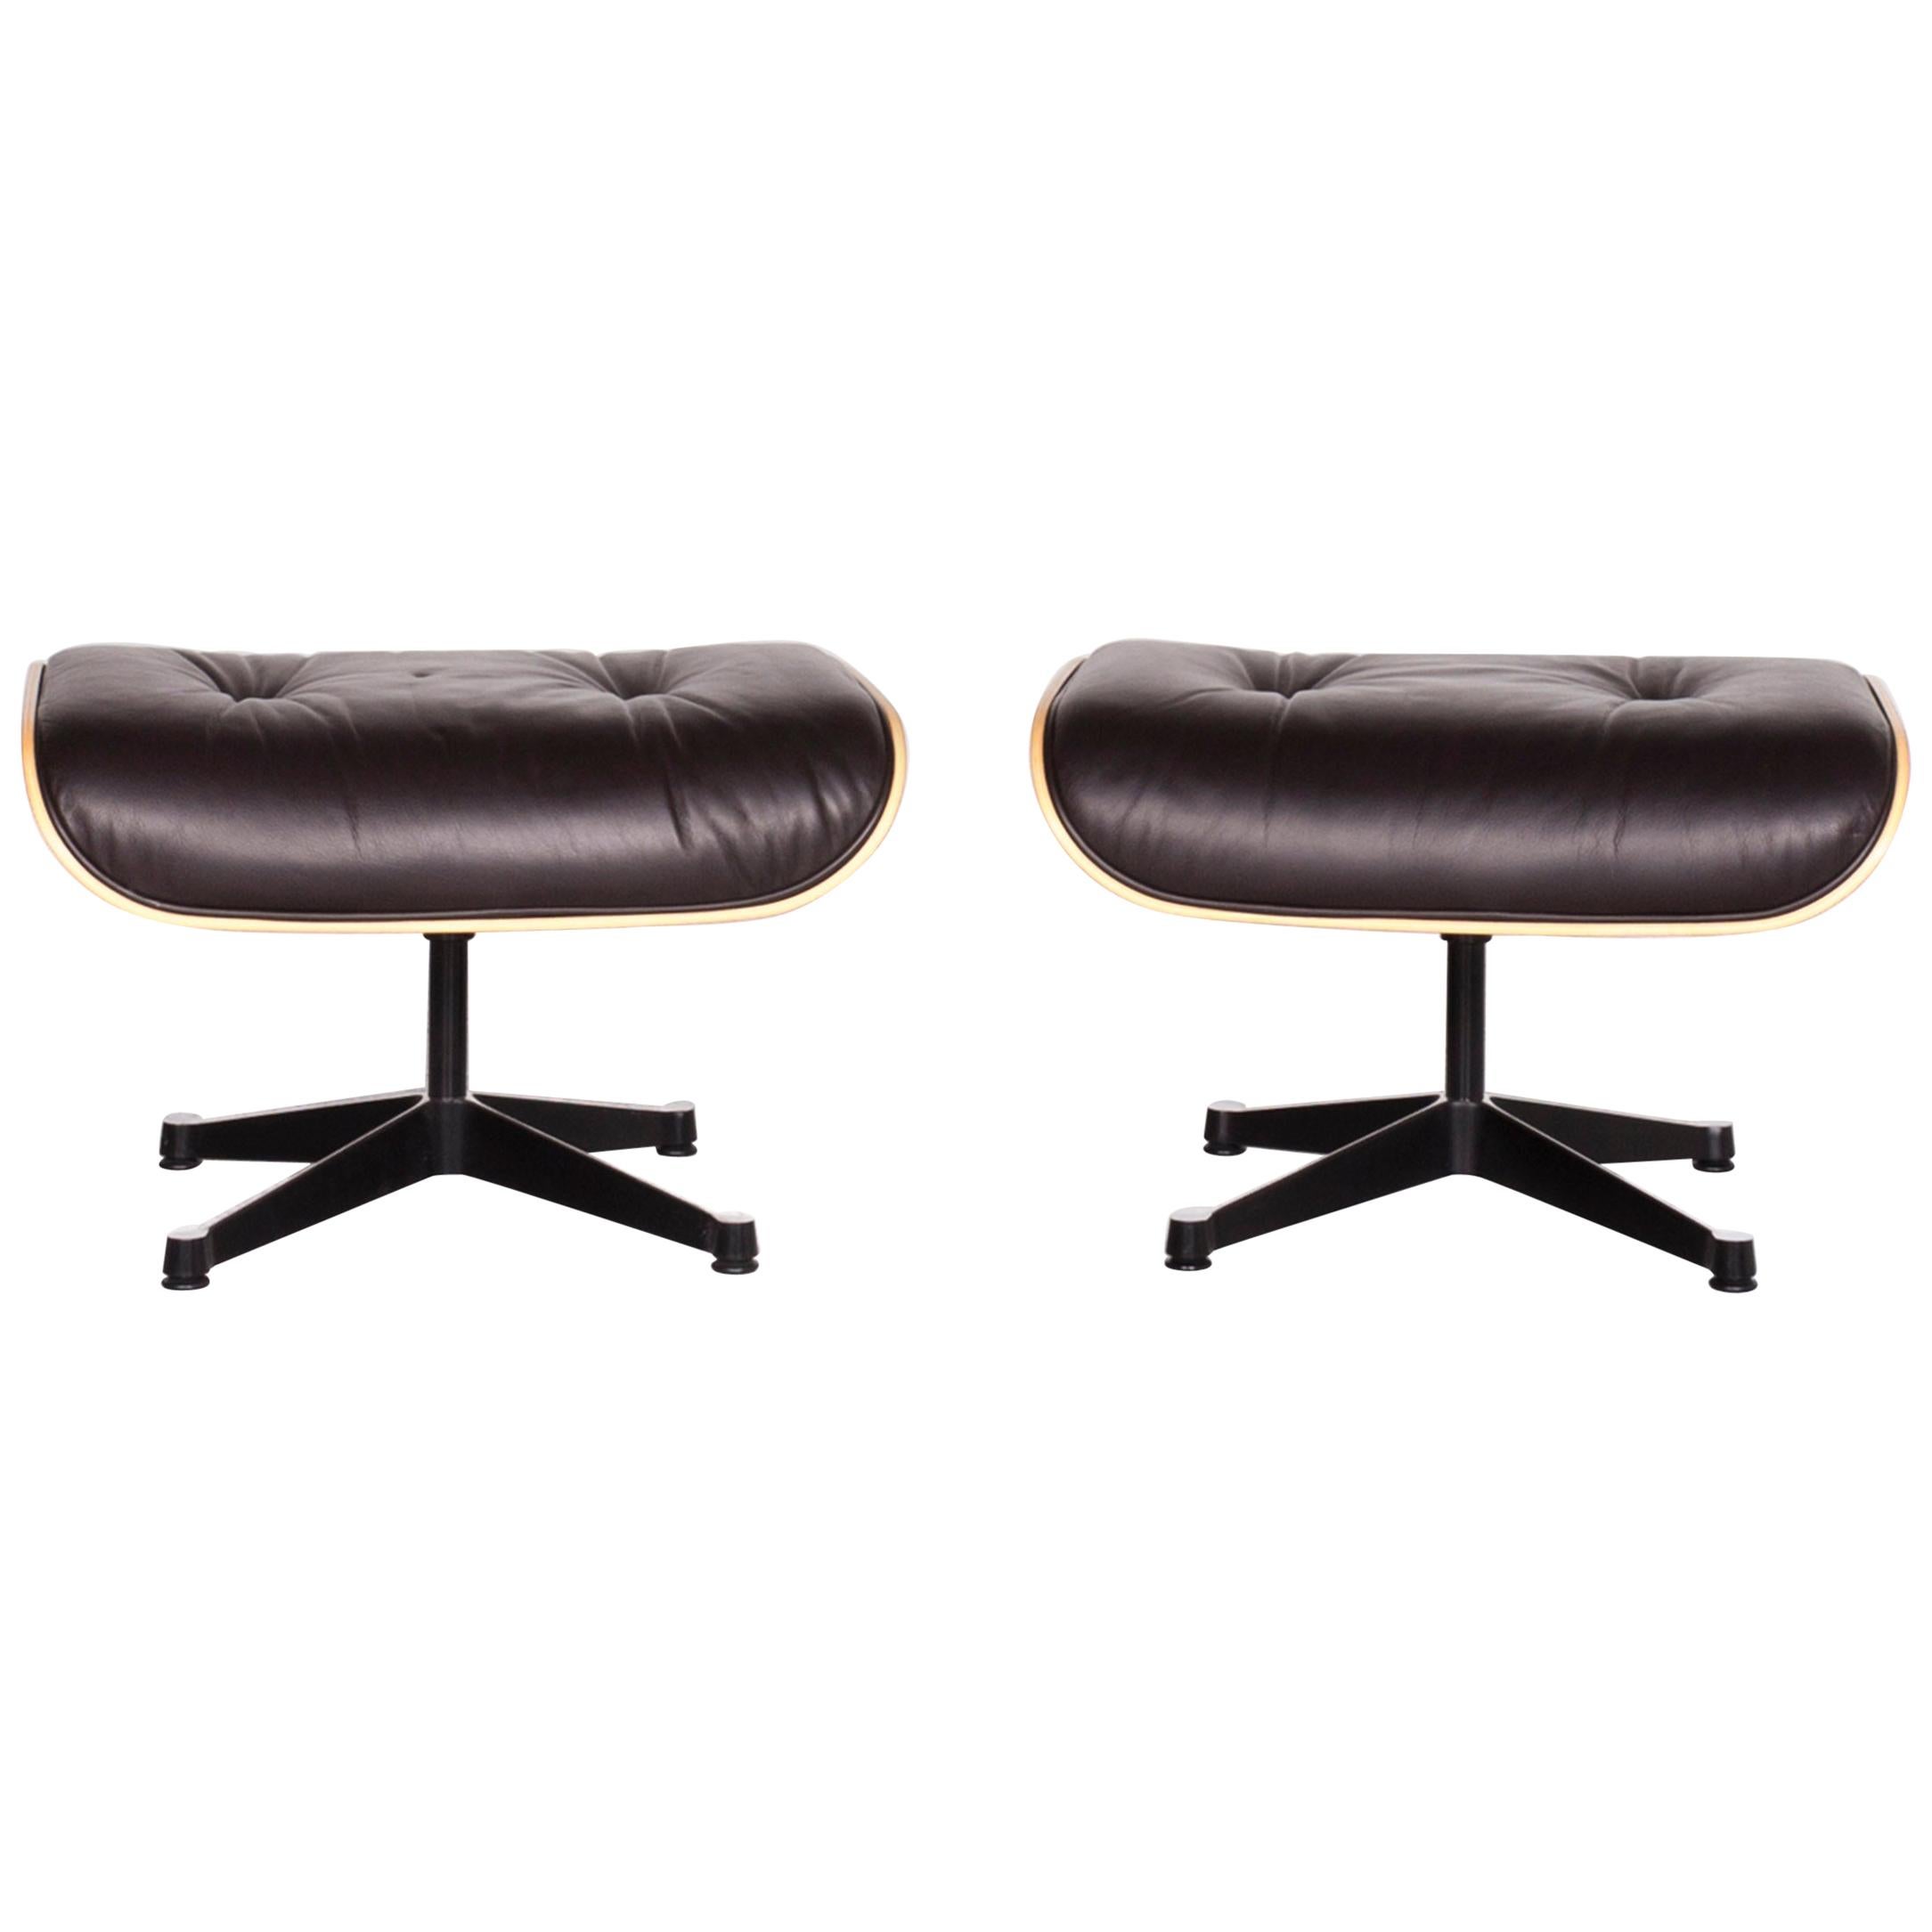 Vitra Eames Lounge Chair Leather Stool Set Brown Charles & Ray Eames Chair For Sale